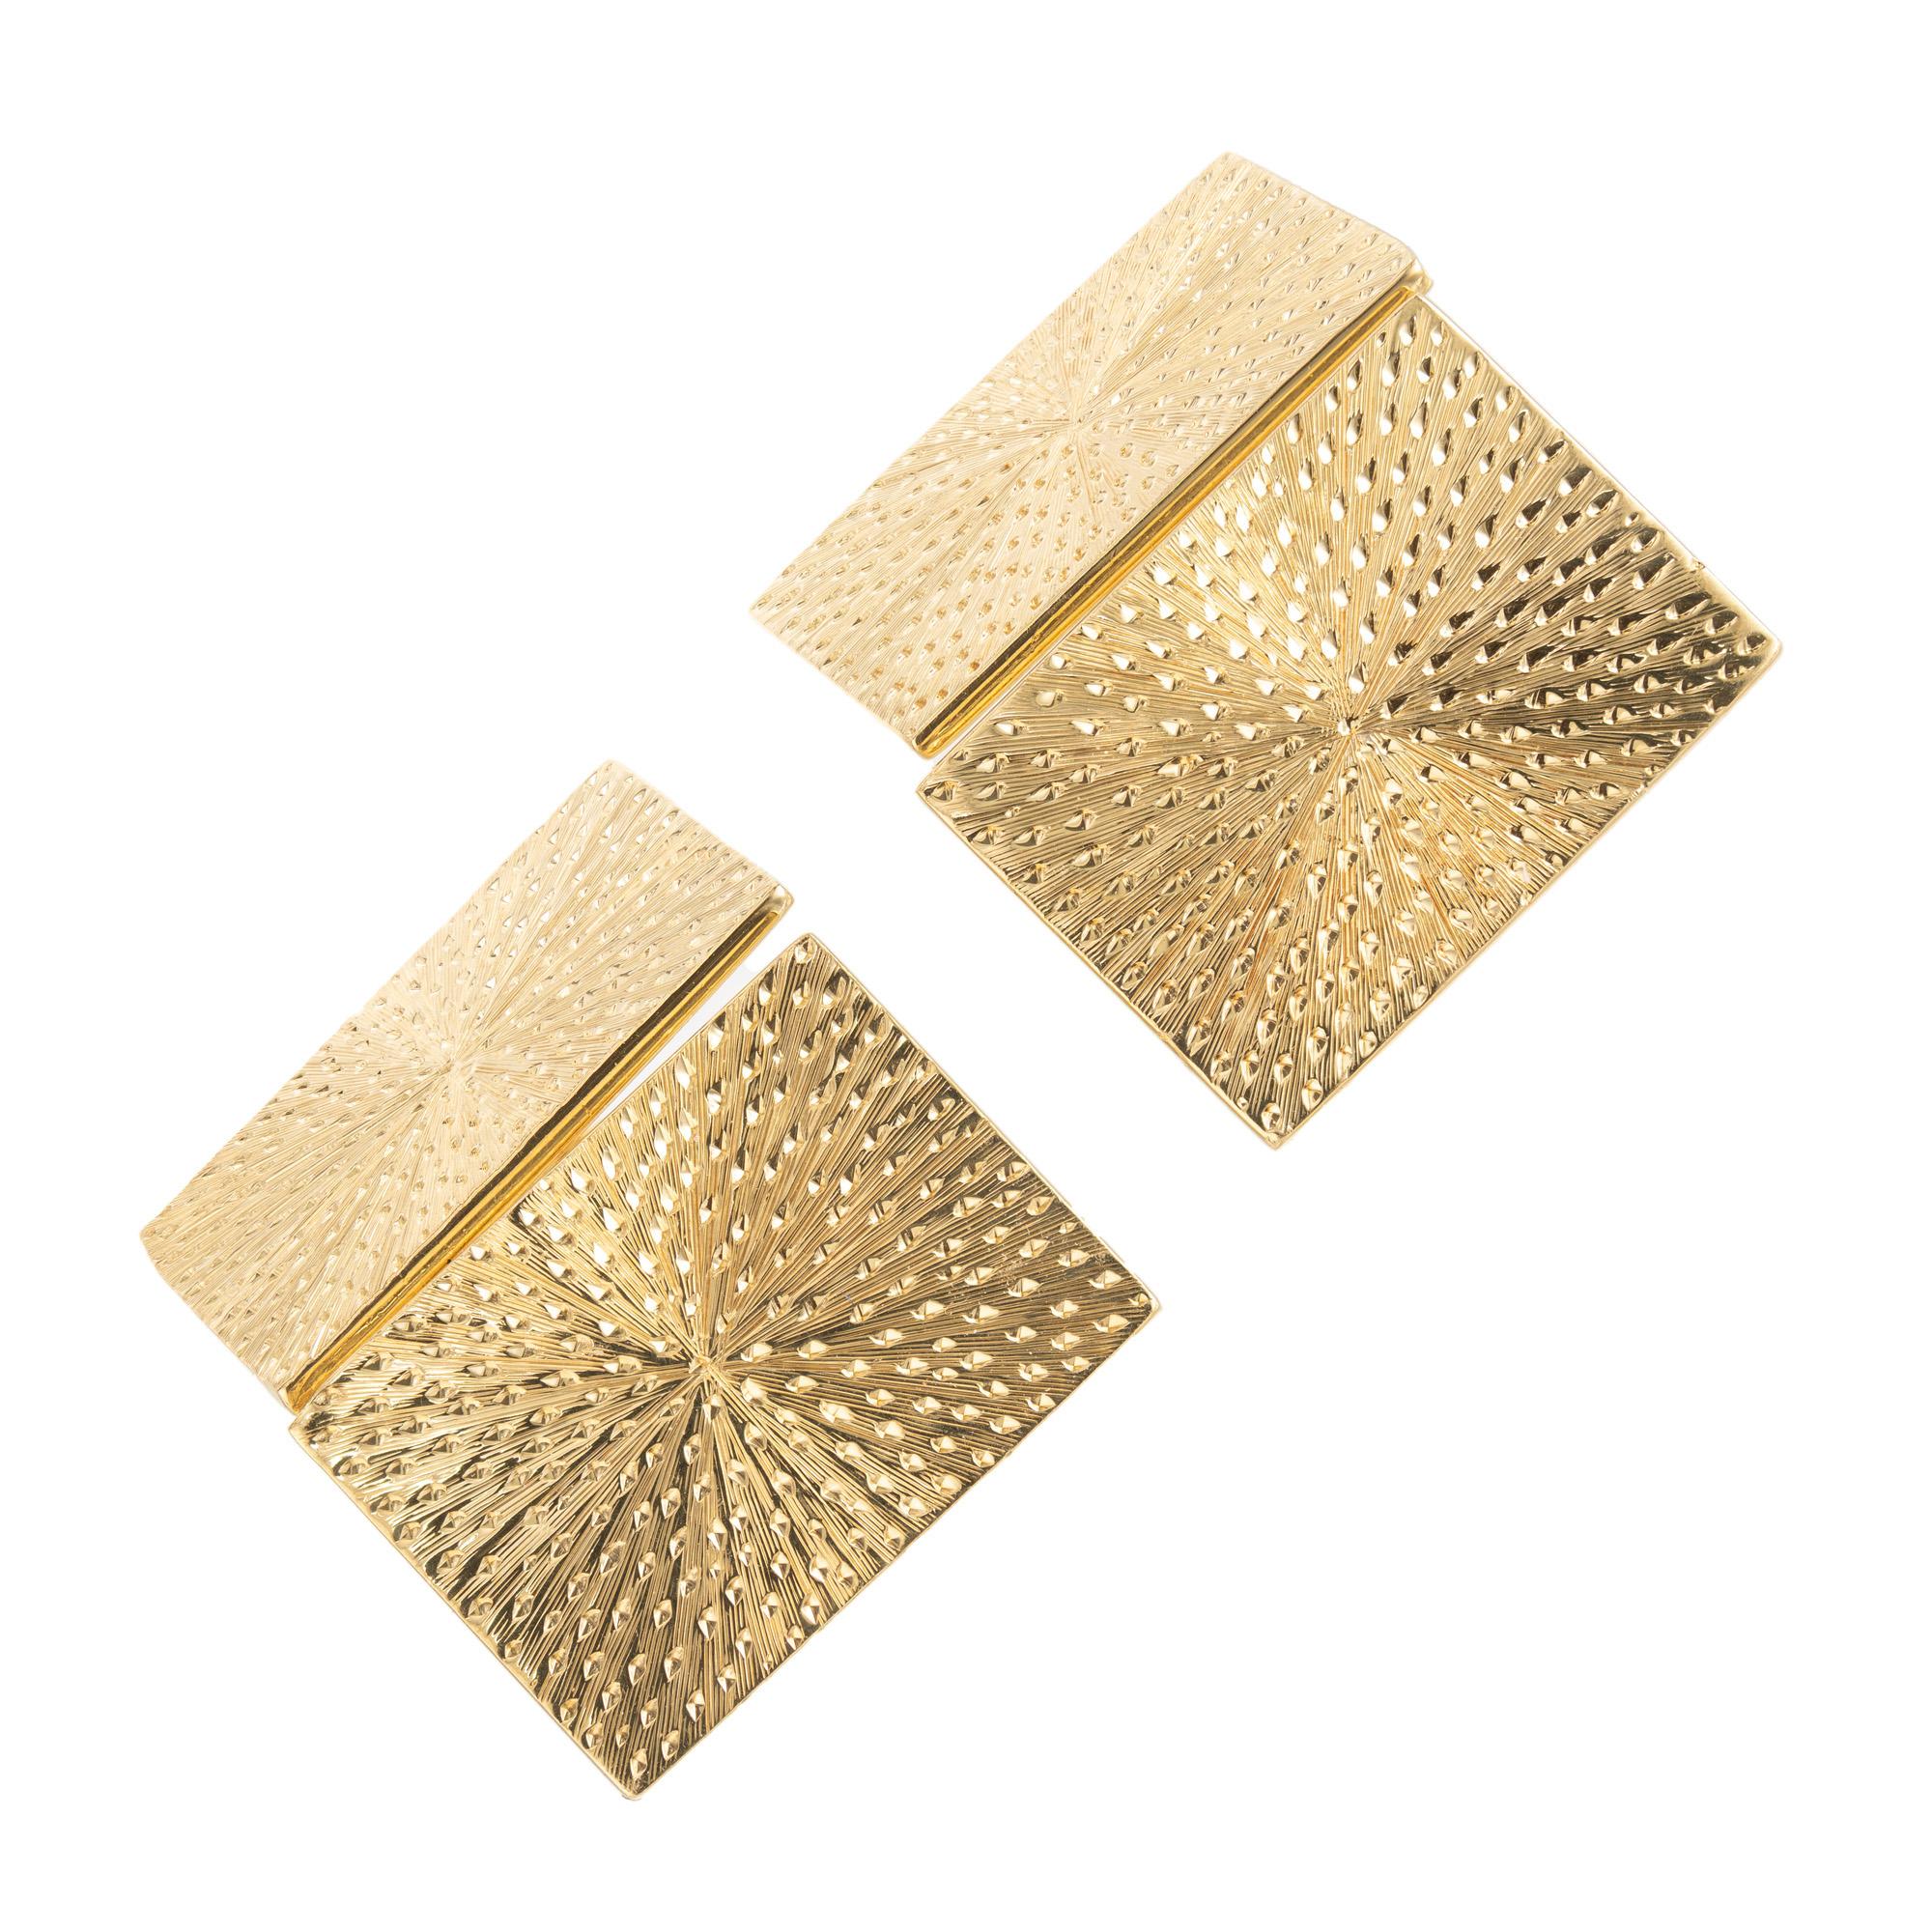 Crafted by Tiffany & Co, these 1960's yellow Gold rectangular cufflinks are solid 18k, double sided, and hand textured. An interesting artistic piece that is a timeless accessory for any formal occasion. Perfect for anyone who appreciates fine